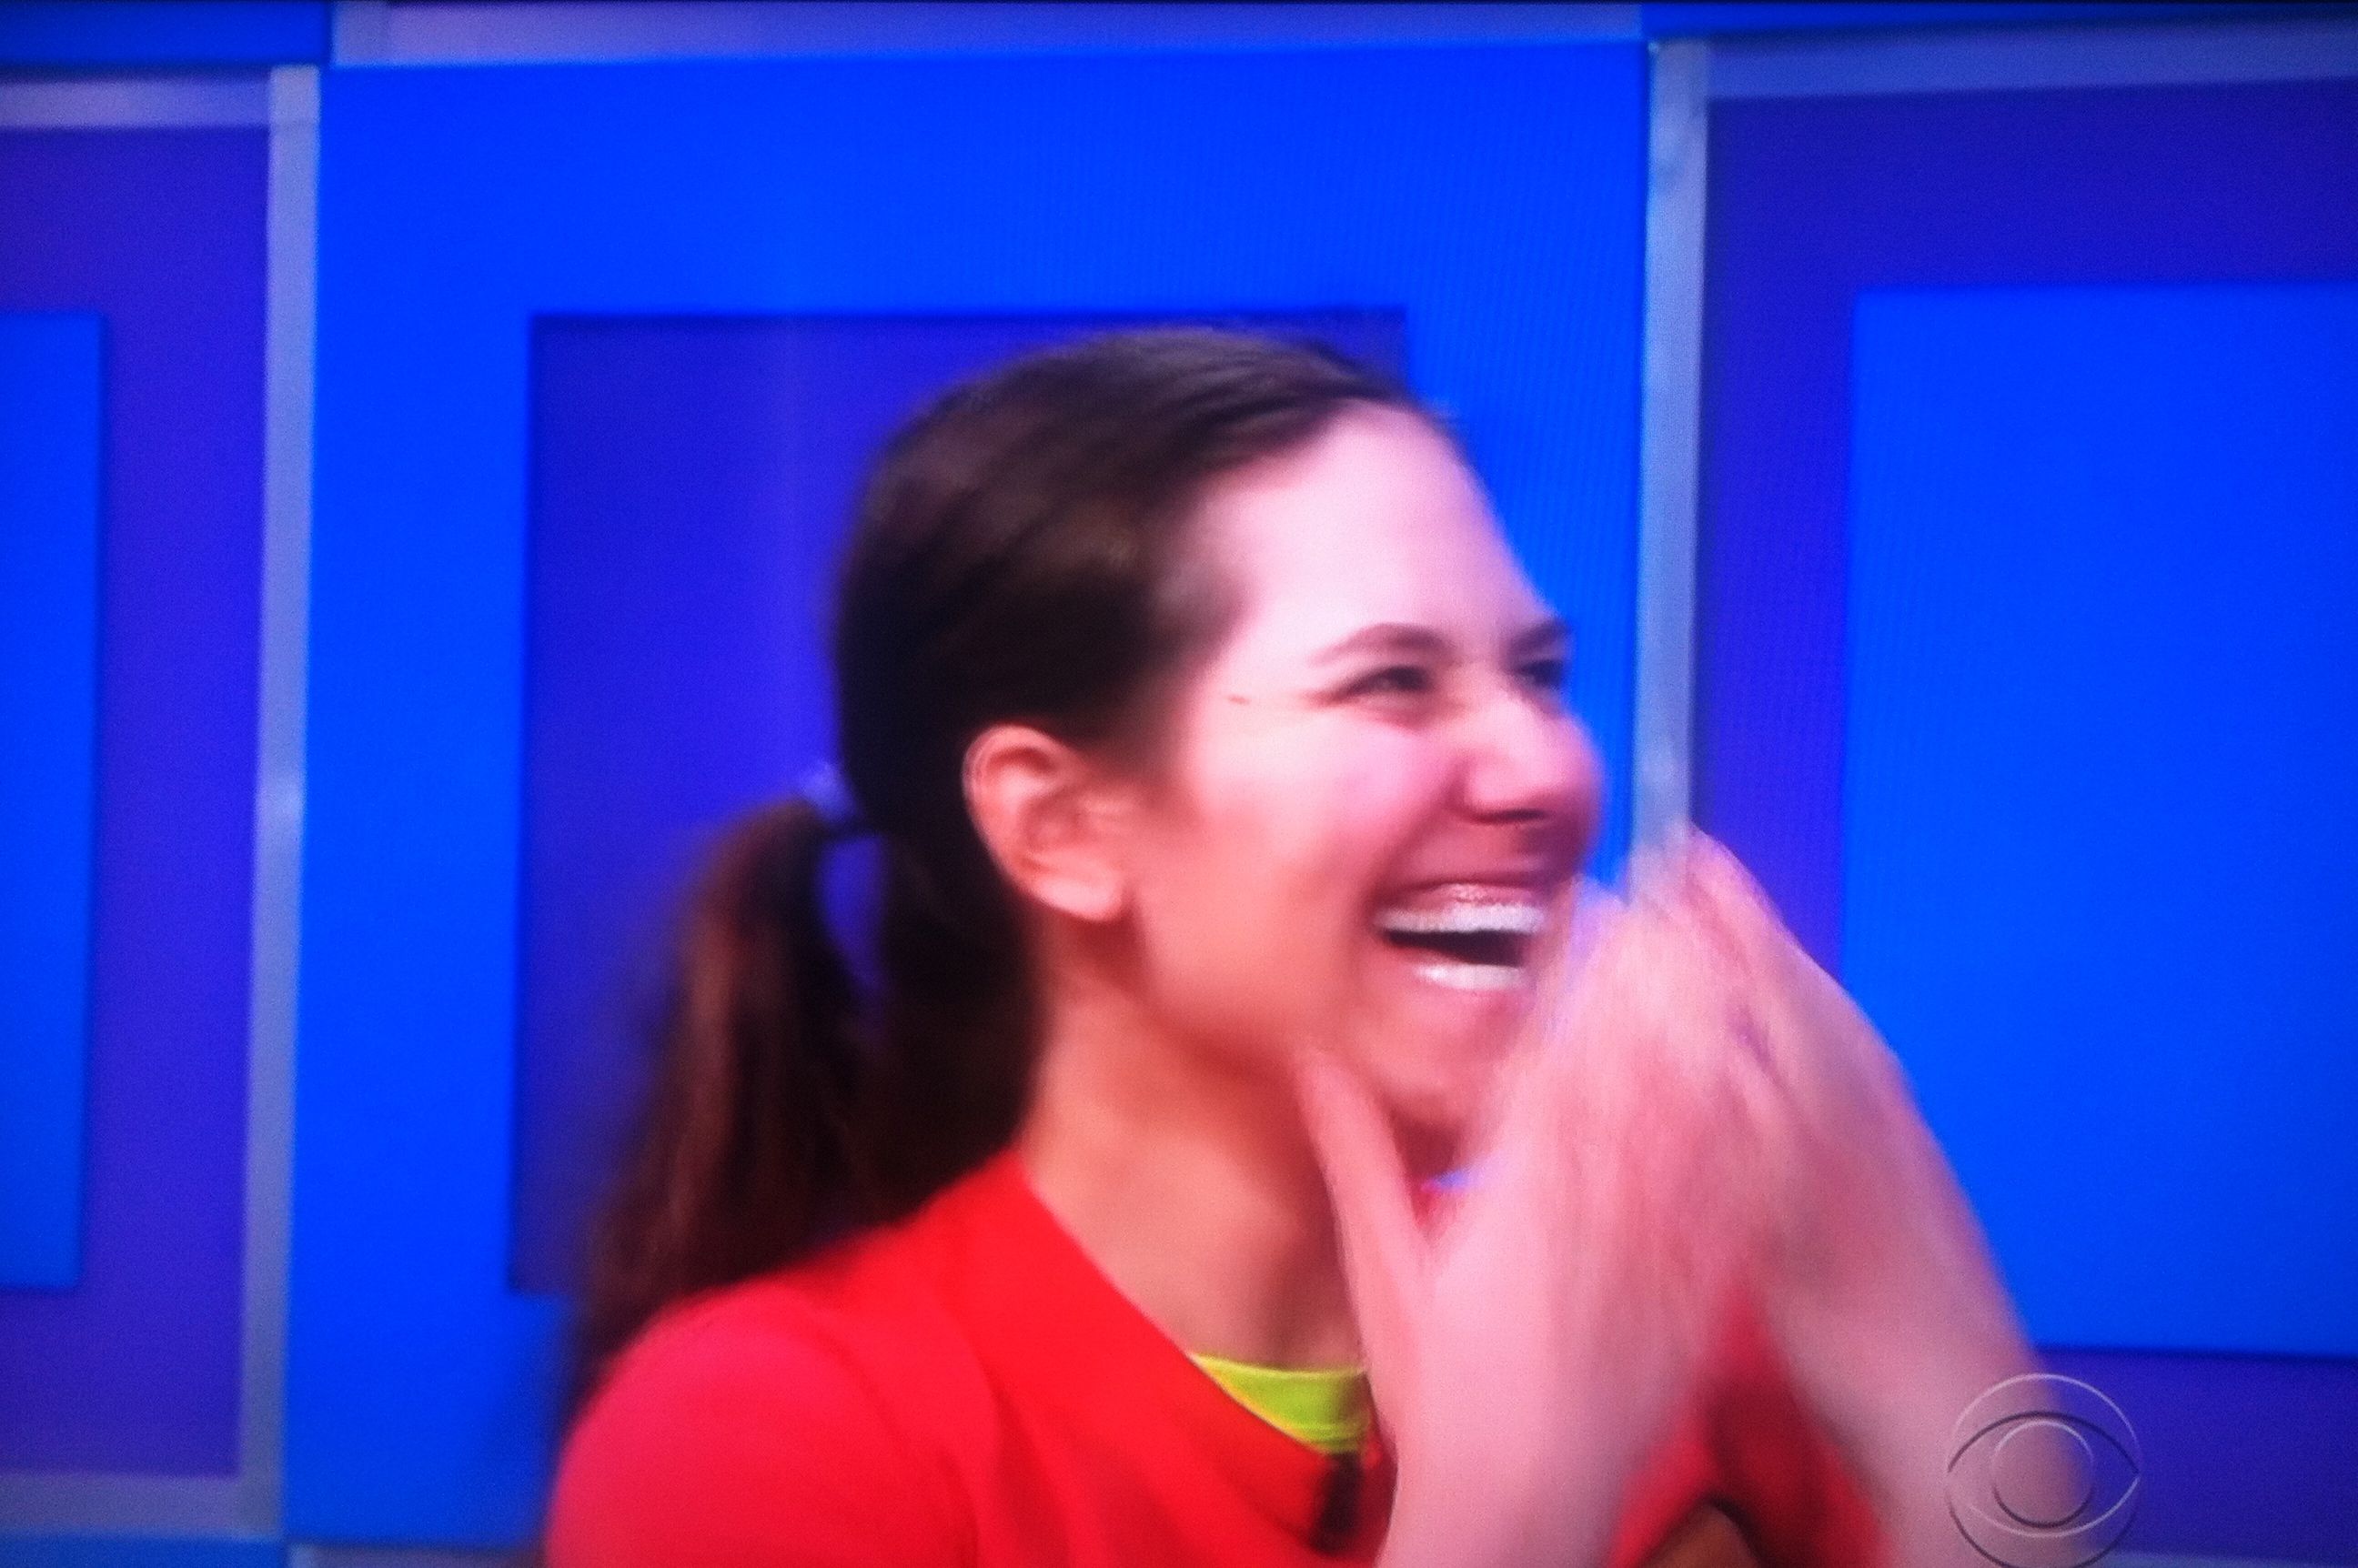 Aurora De Lucia laughing at something Drew Carey said on The Price is Right stage